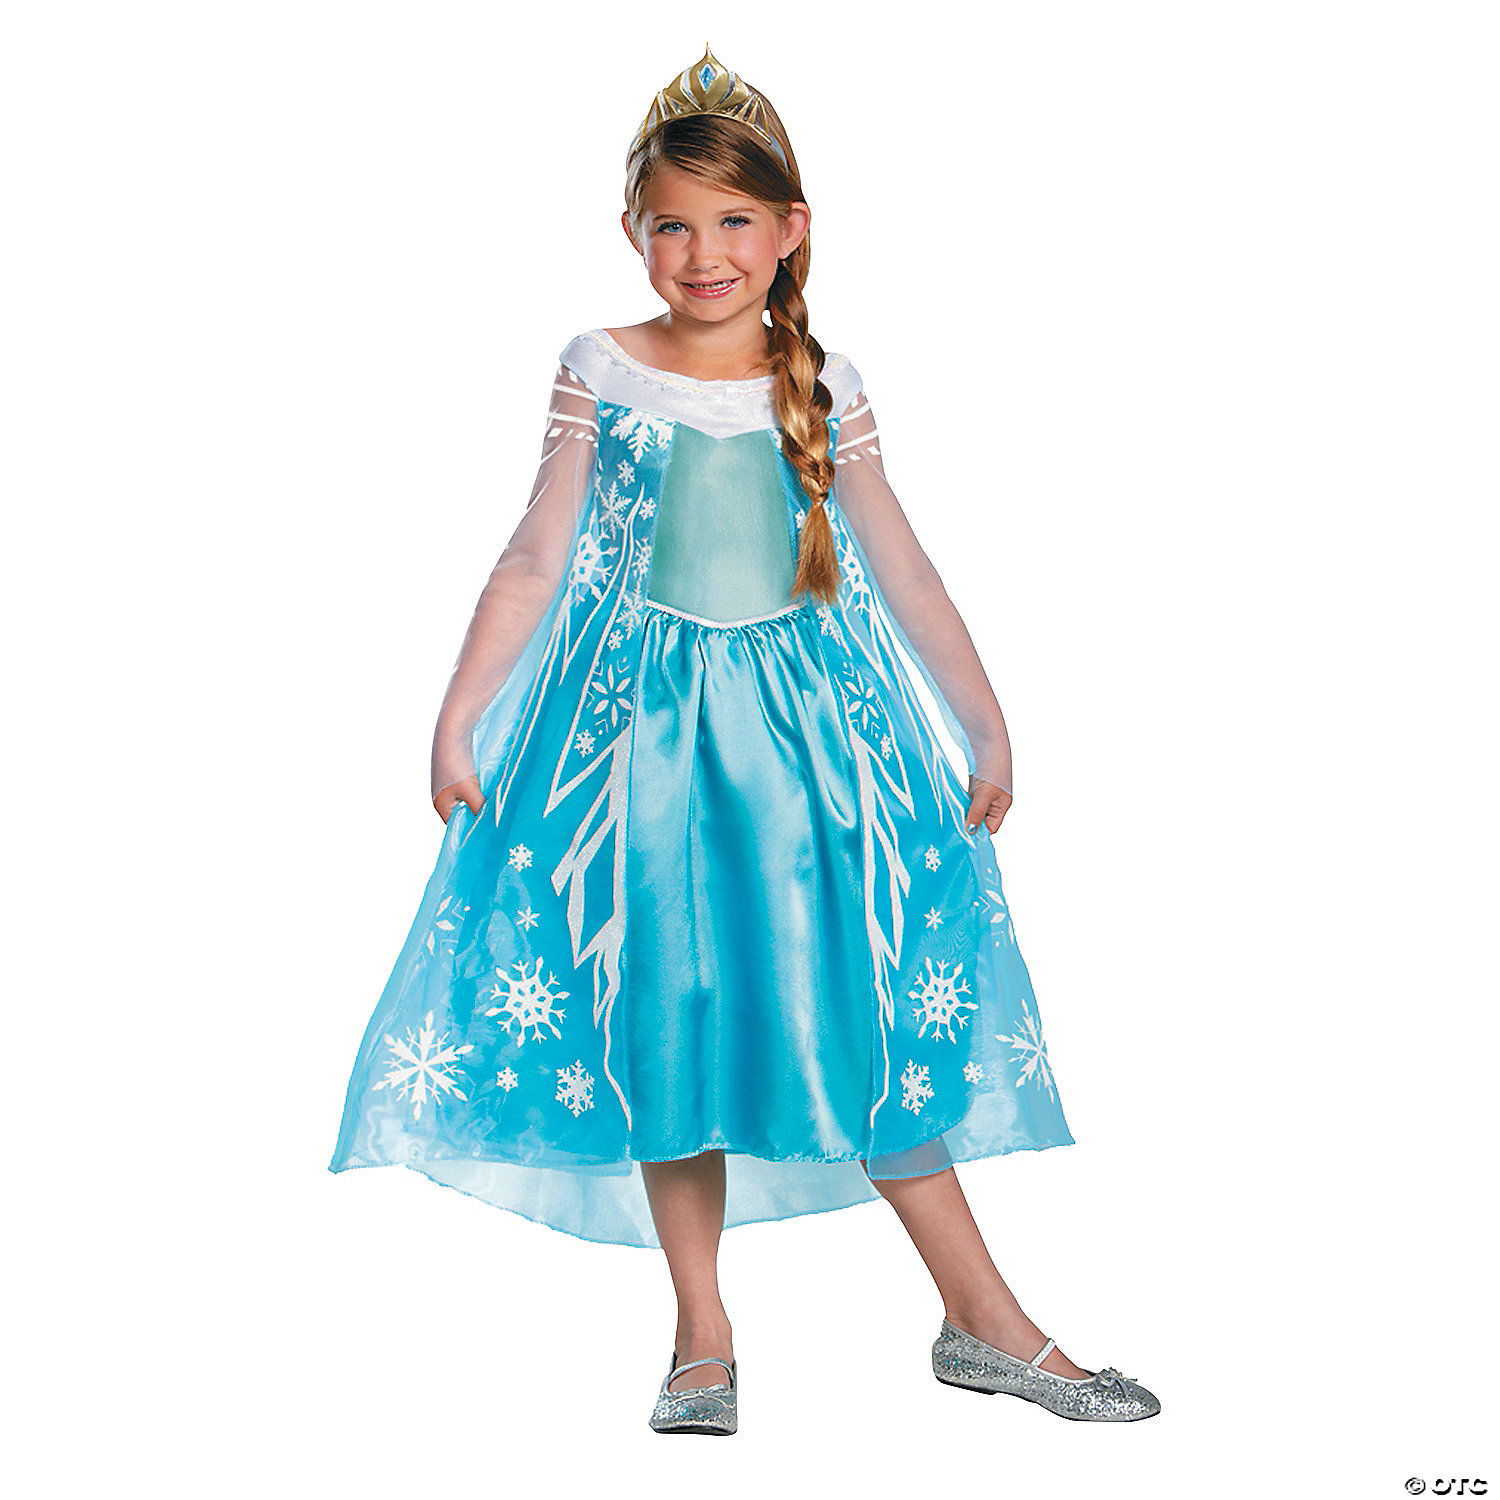 Girls Princess Fancy Costume Dress in ICY Blue with Accessories